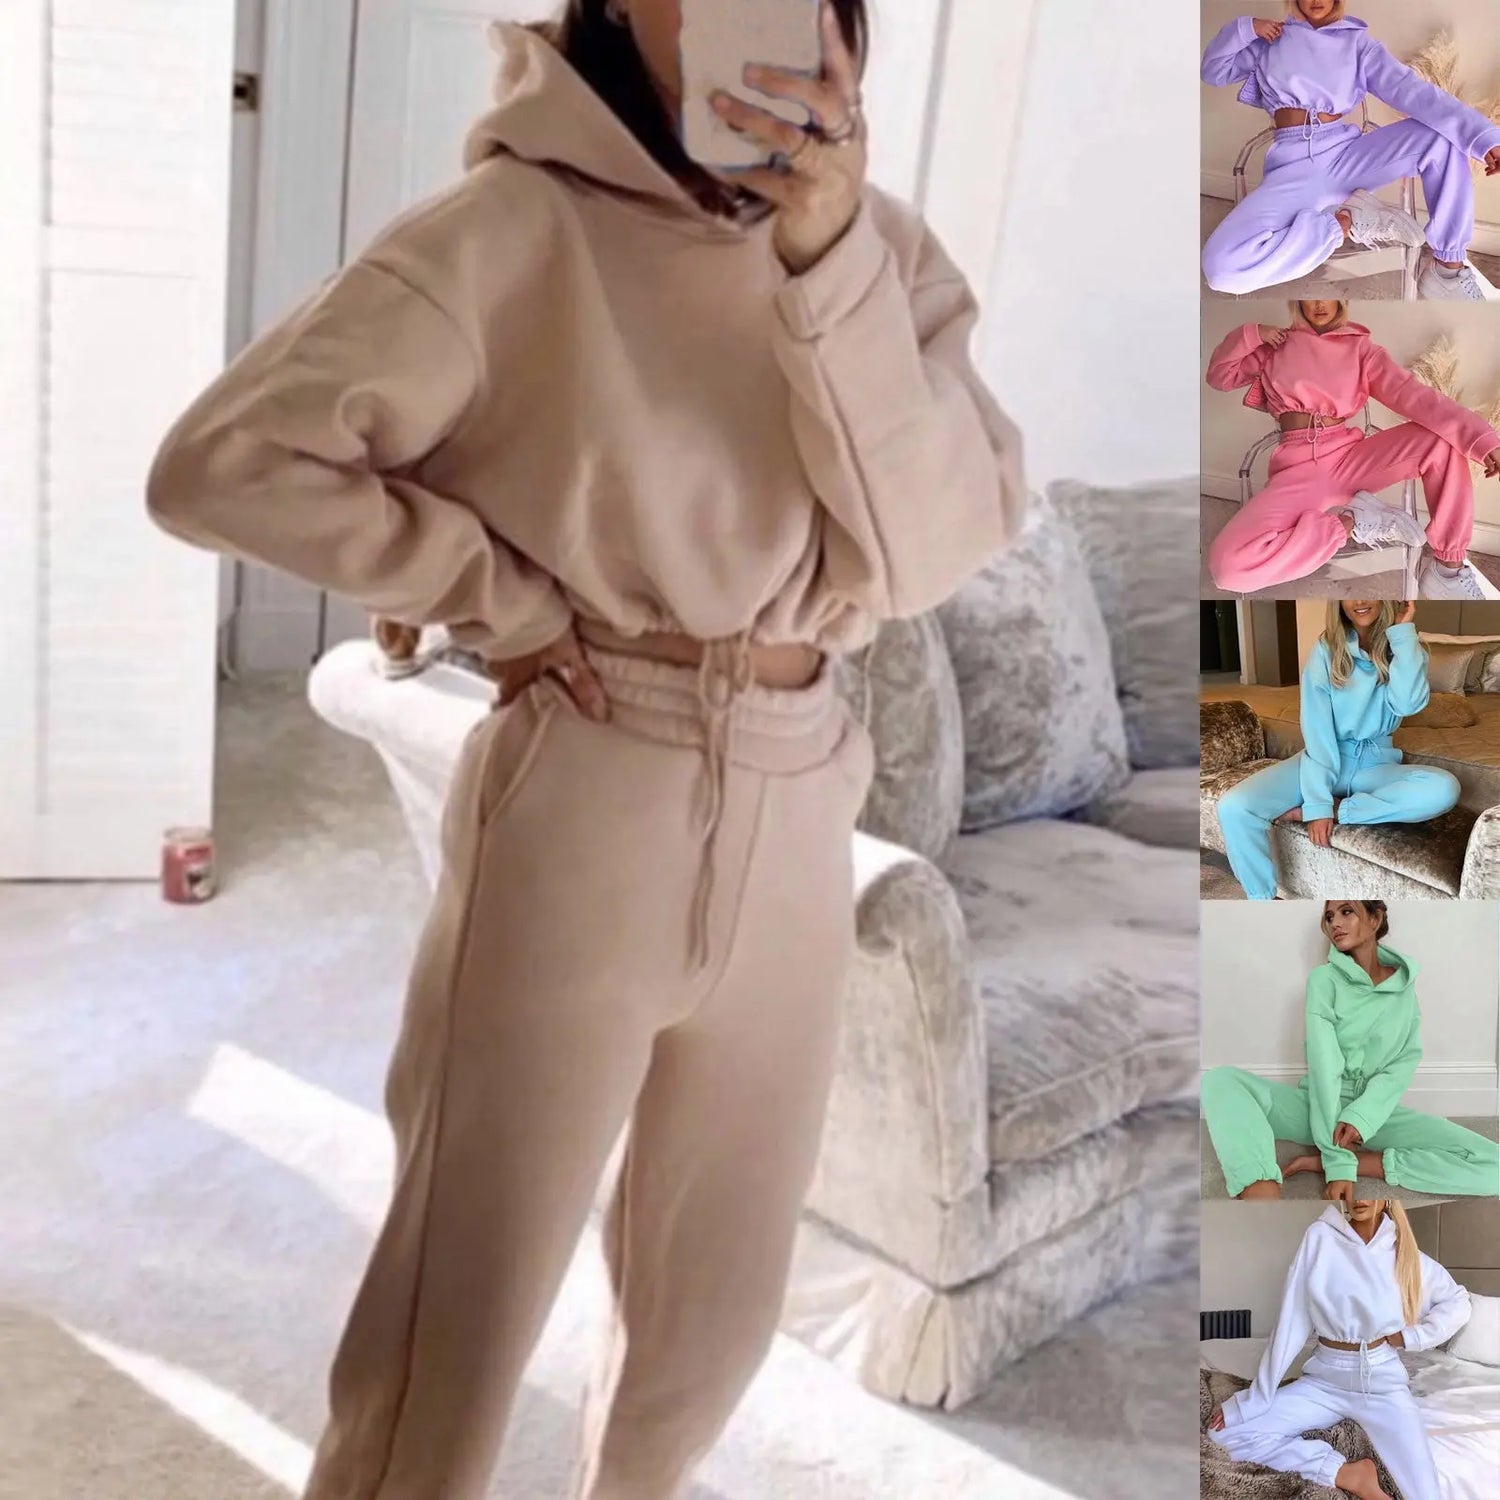 dresses  | Jogging Suits For Women 2 Piece Sweatsuits Tracksuits Sexy Long Sleeve HoodieCasual Fitness Sportswear | [option1] |  [option2]| thecurvestory.myshopify.com